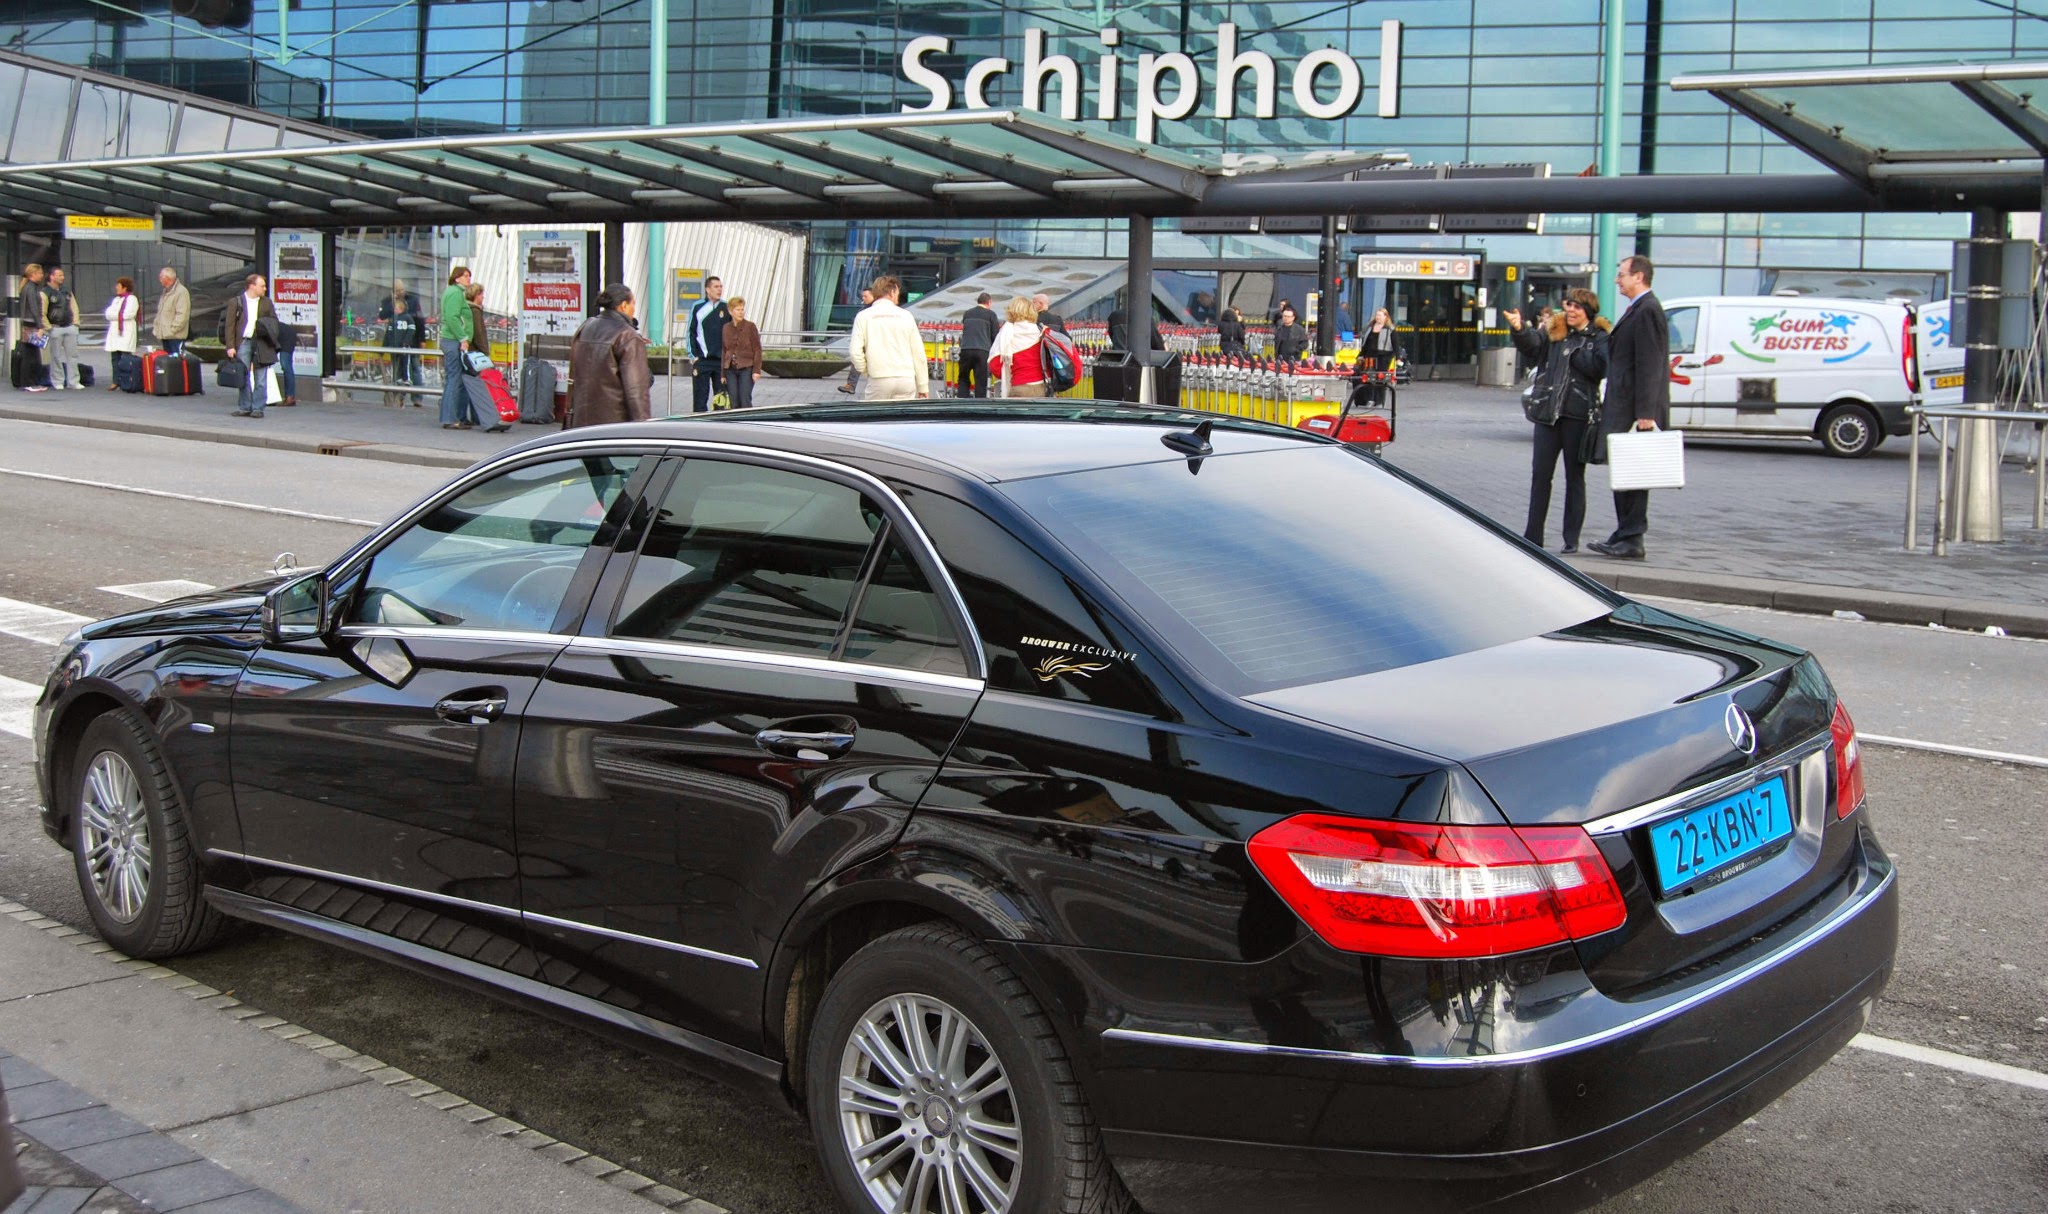 Schiphol Taxis